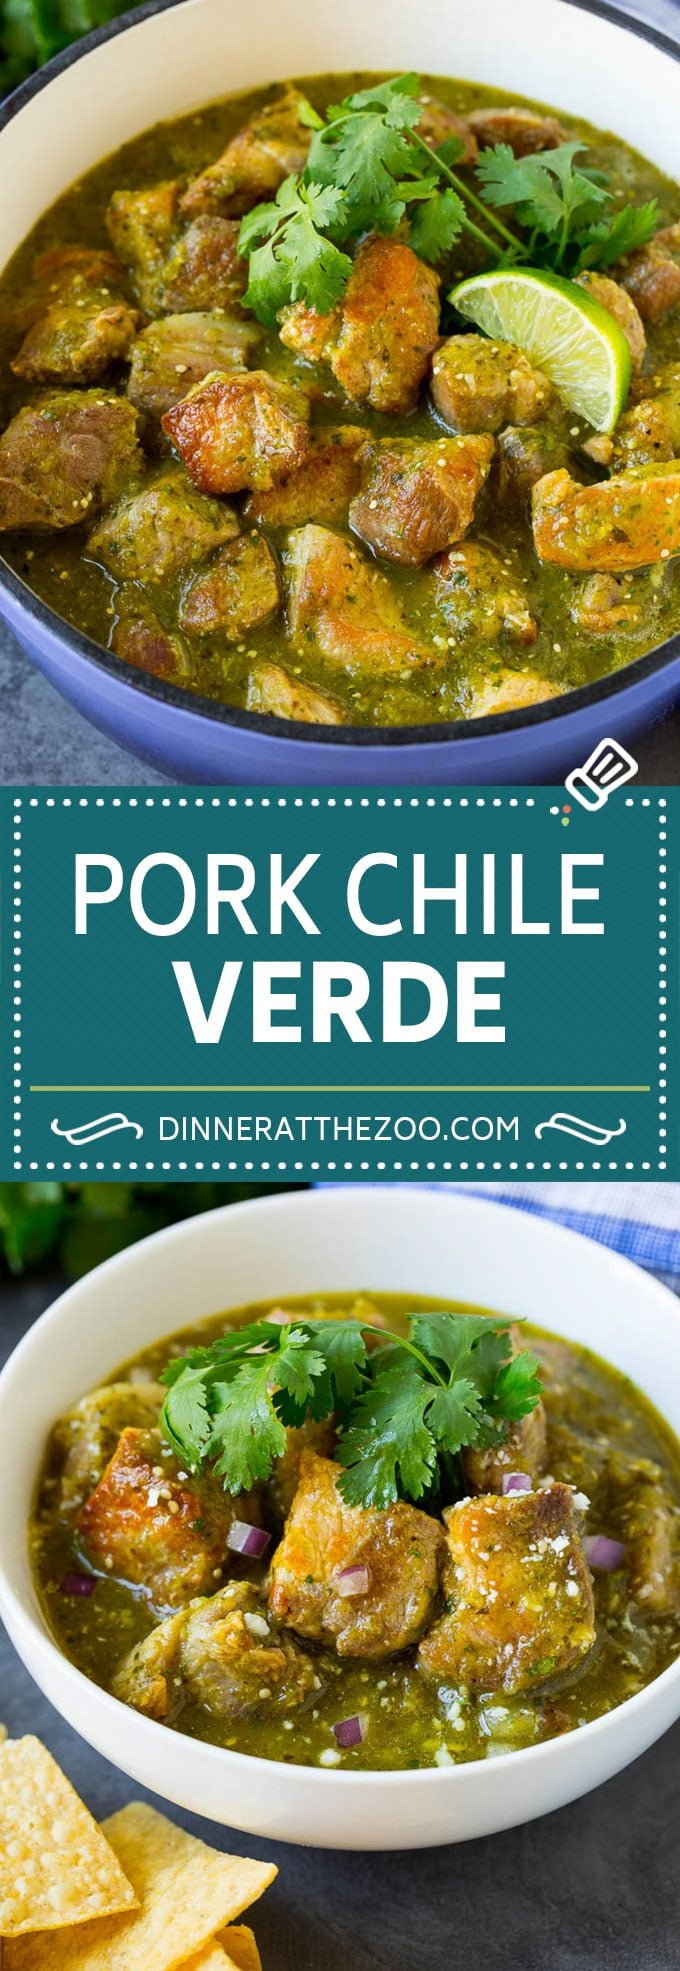 This chile verde is chunks of pork in a green tomatillo sauce, all simmered together until the meat is fall-apart tender.